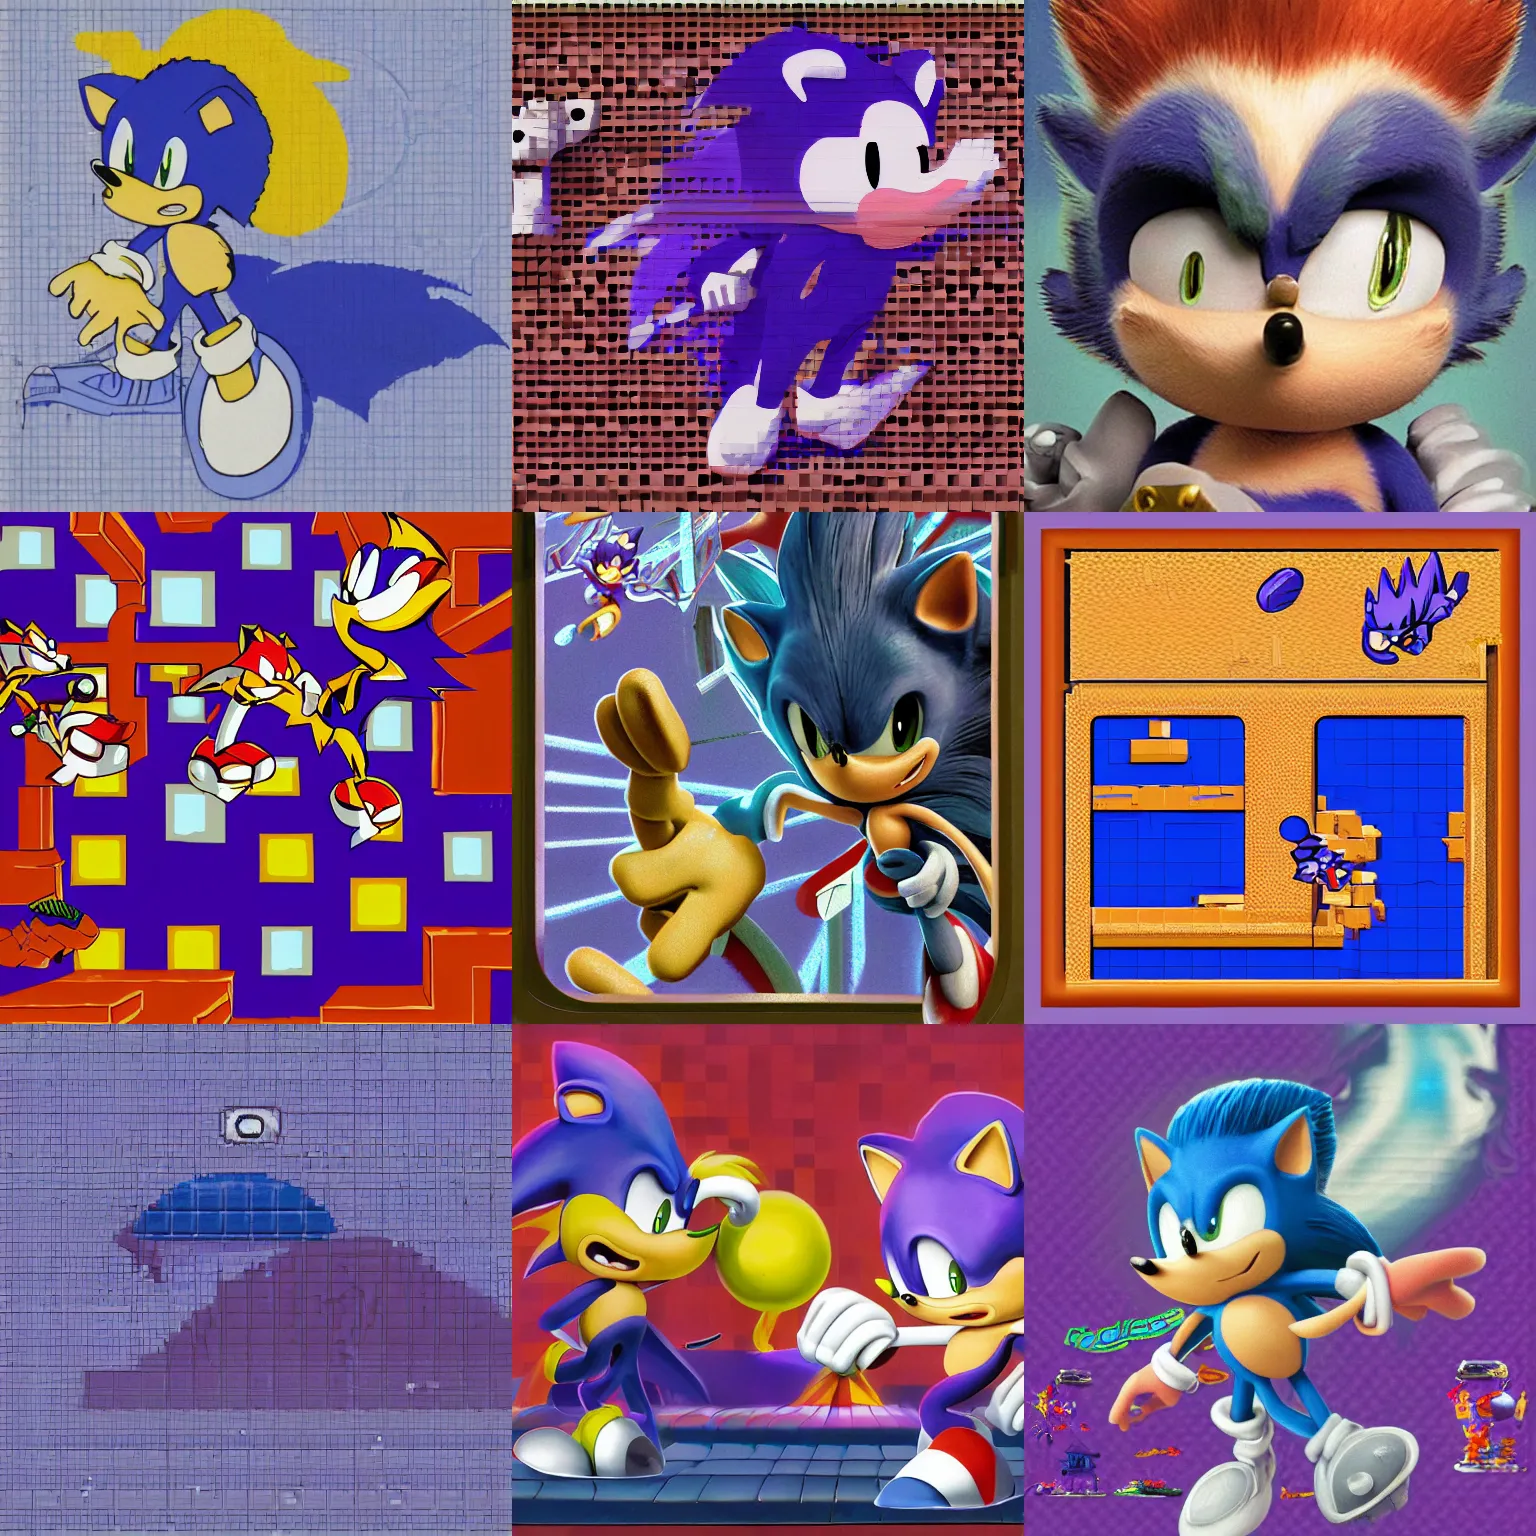 Prompt: sonic hedgehog portrait deconstructivist claymation untextured matte painting lowbrow of a surreal sonic hedgehog, retro moulded professional soft pastels quality airbrush art album cover of a liquid dissolving airbrush art dreams sonic the hedgehog swimming through dreams purple fisheye checkerboard background 1 9 9 0 s 1 9 9 2 sega genesis video game album cover